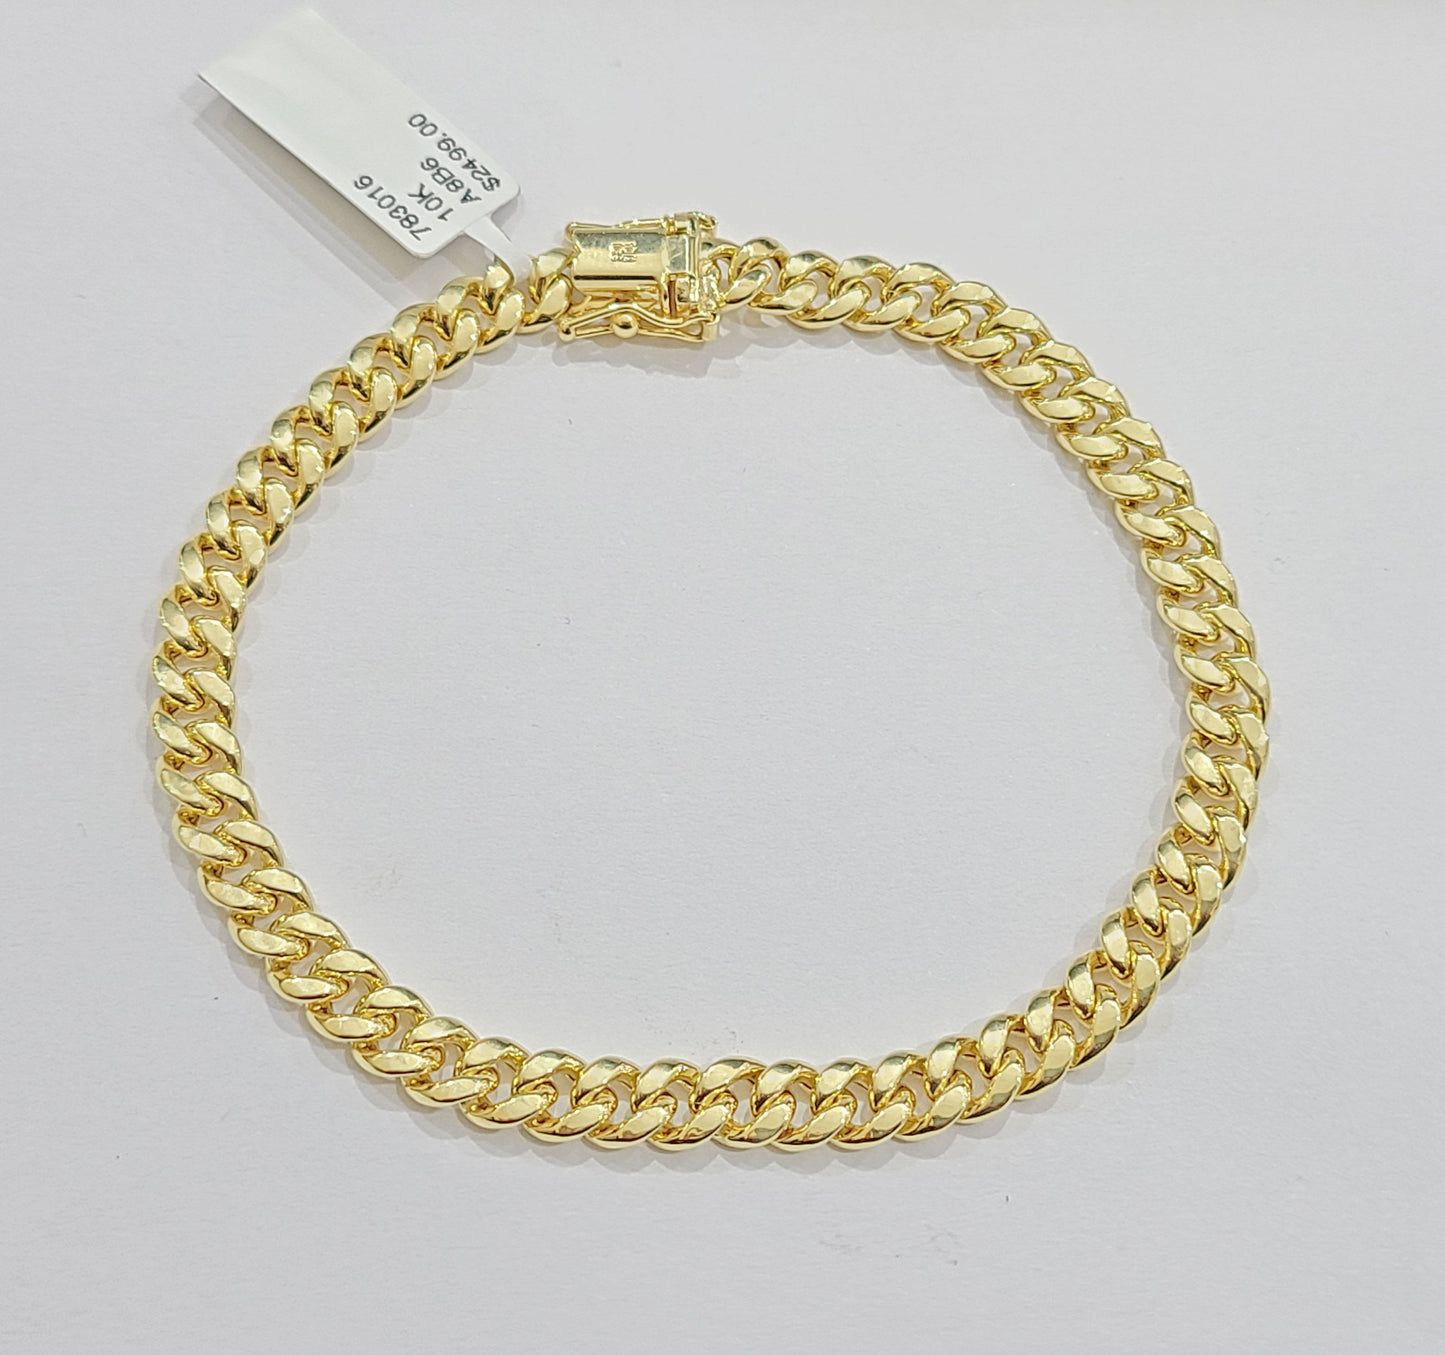 Real 10k Yellow Gold Miami Cuban Link Bracelet 7.5" inch 6mm 10kt Kids and Ladies